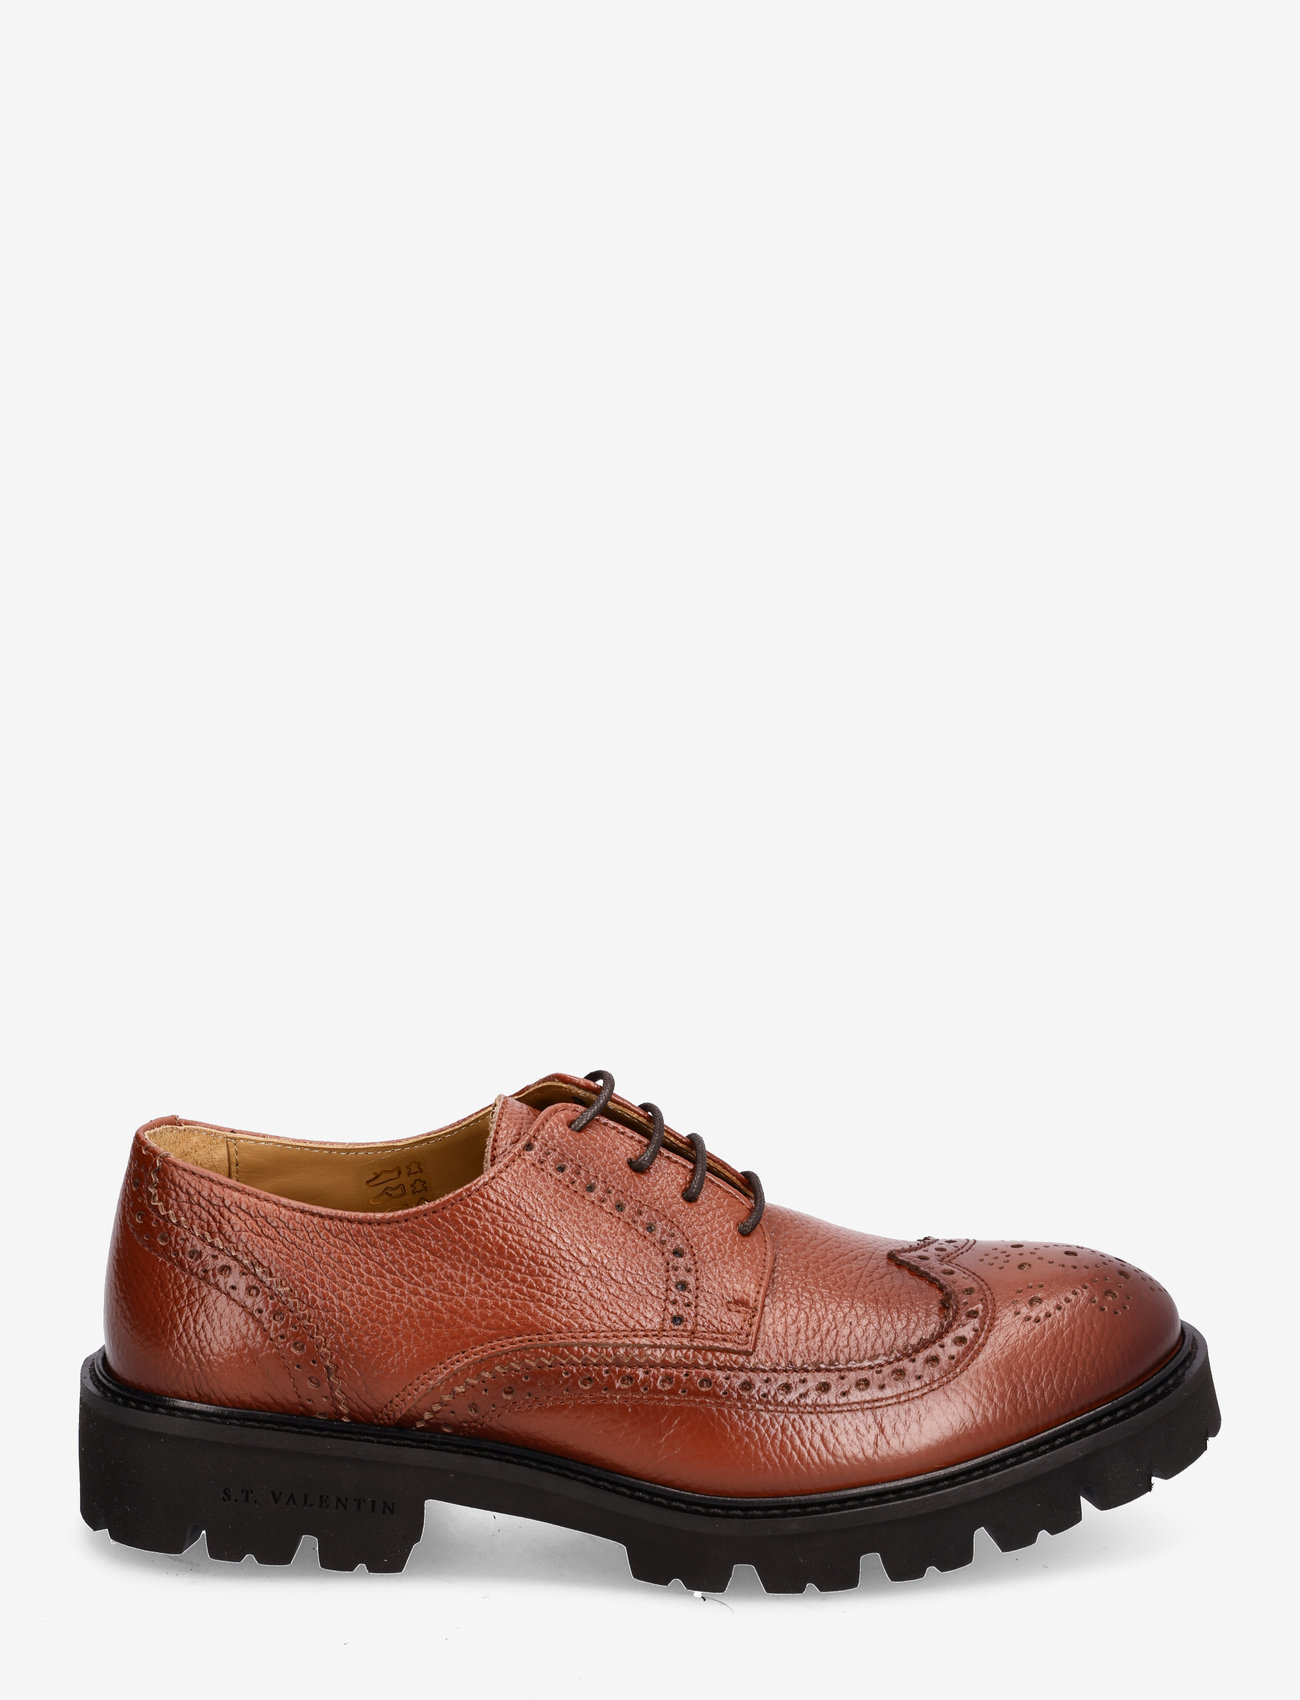 S.T. VALENTIN - Lightweight Derby Brogue - Grained leather - business shoes - cognac - 1